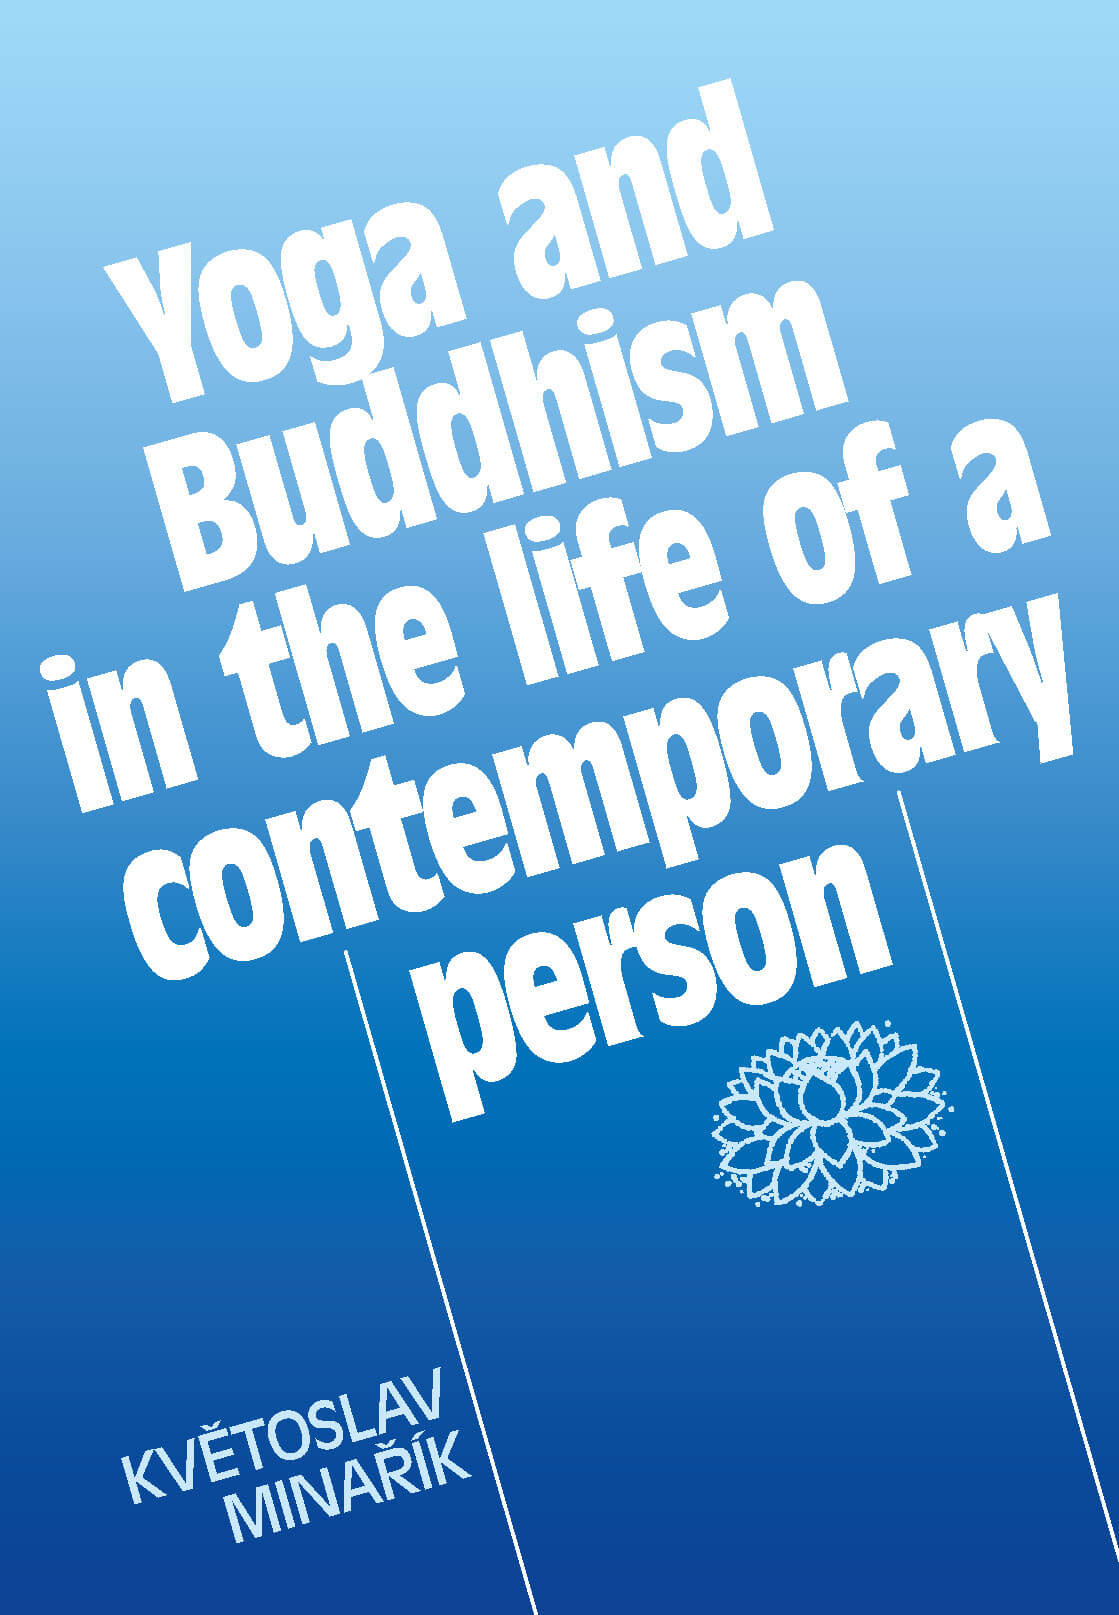 Yoga and buddhism in the life of a contemporary person